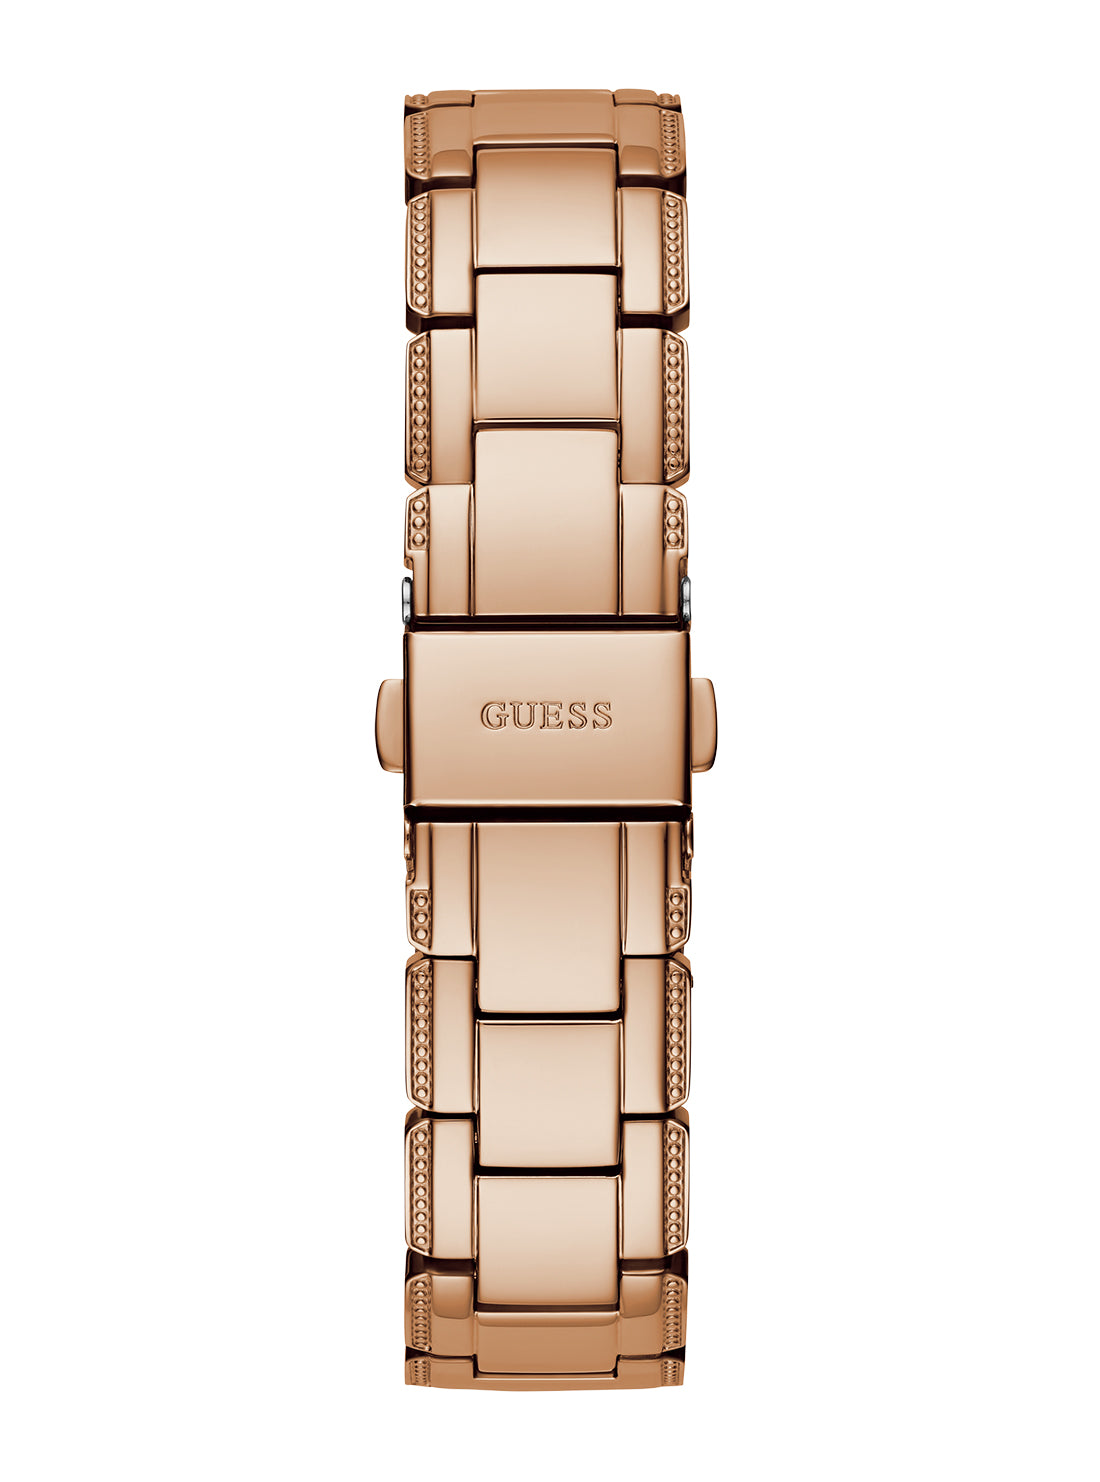 GUESS Women's Rose Gold Crystal Clear Glitz Watch GW0470L3 Back View